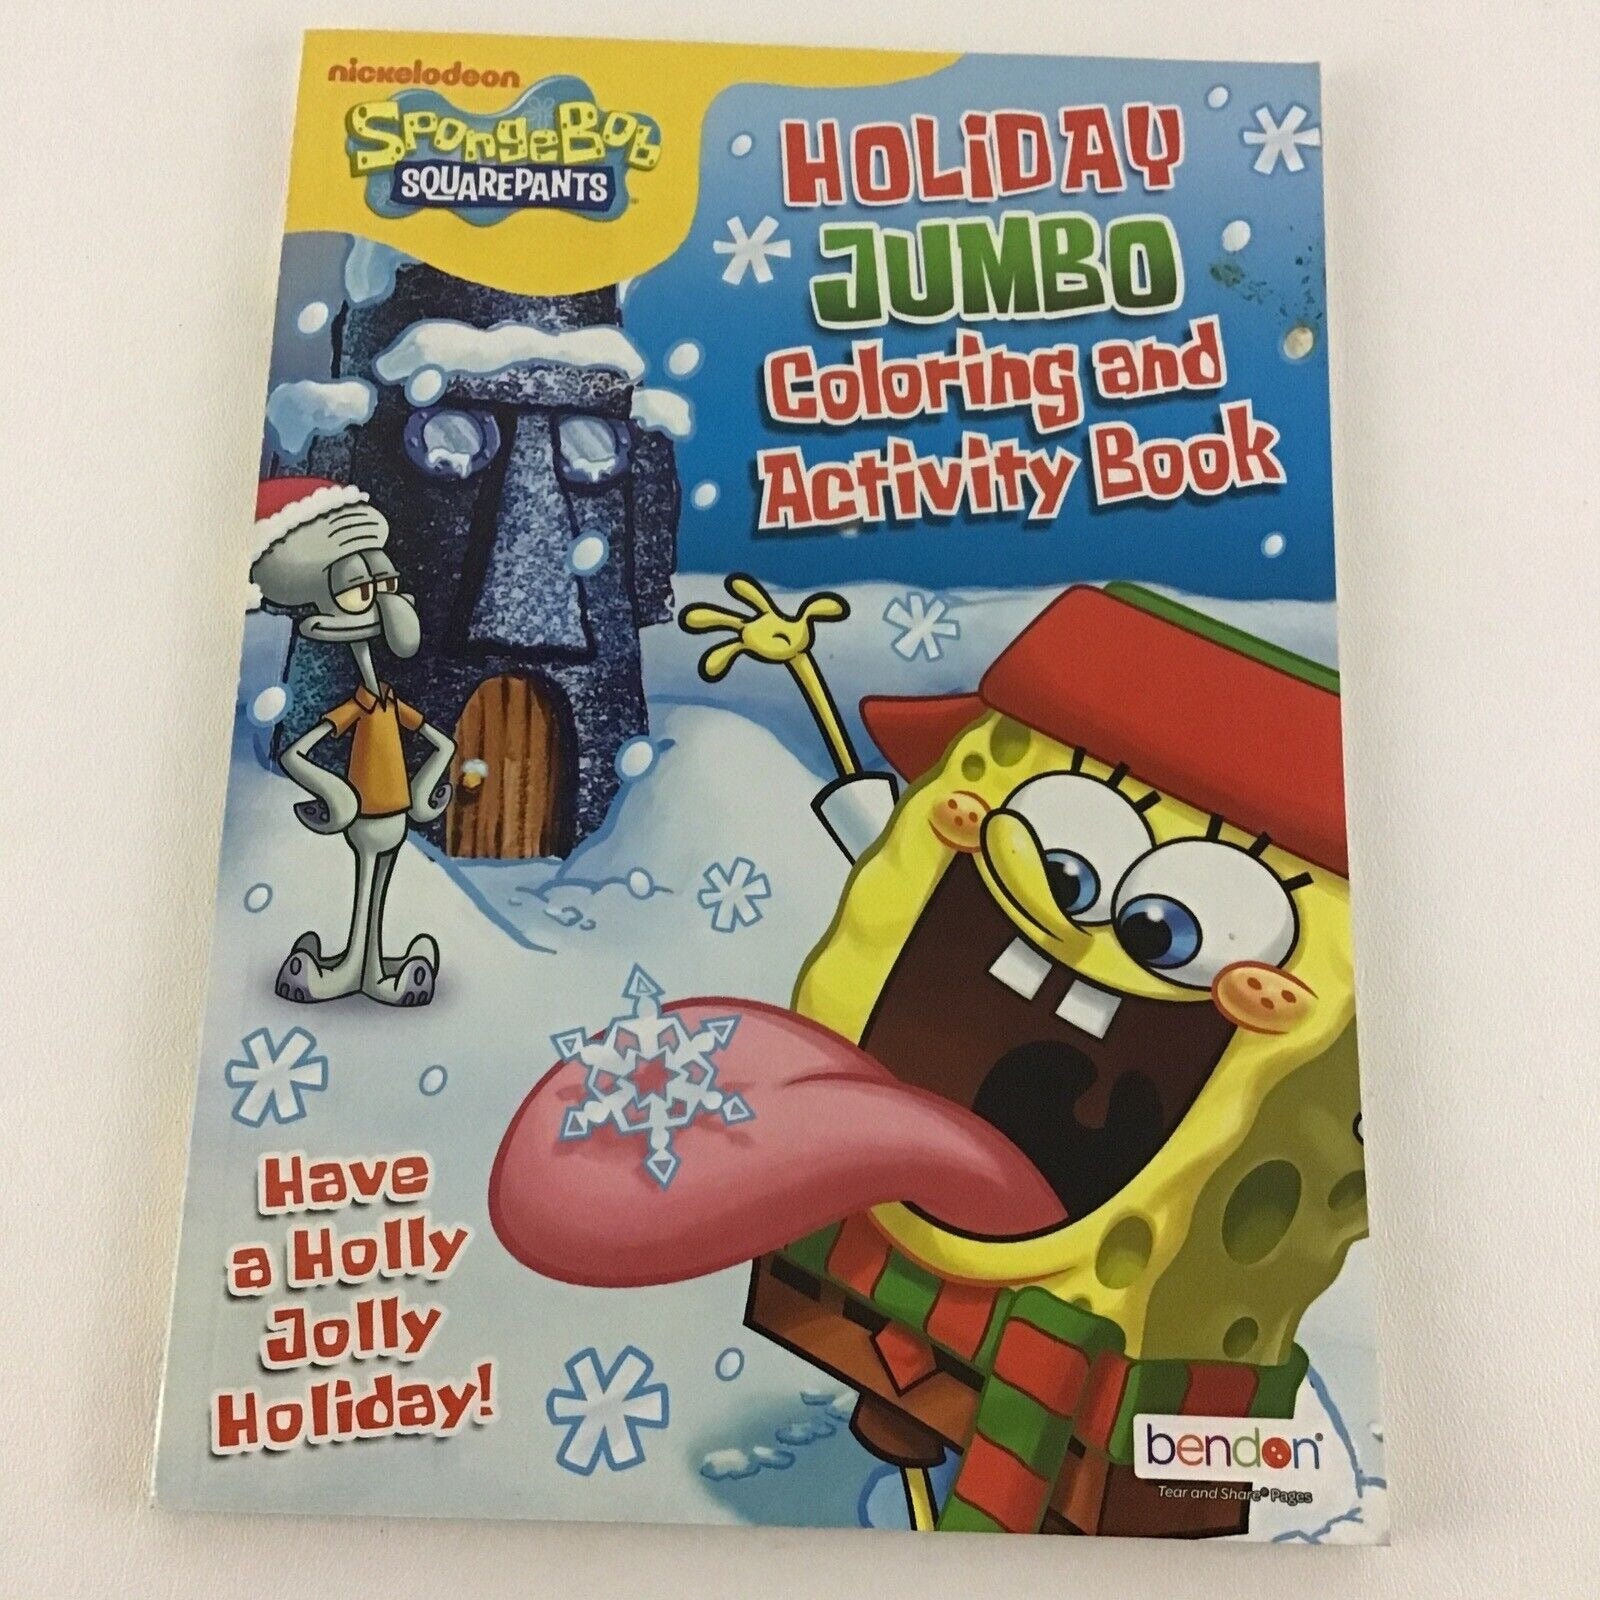 Variety 2 SpongeBob Play Pack Coloring Book Crayons Stickers Christmas